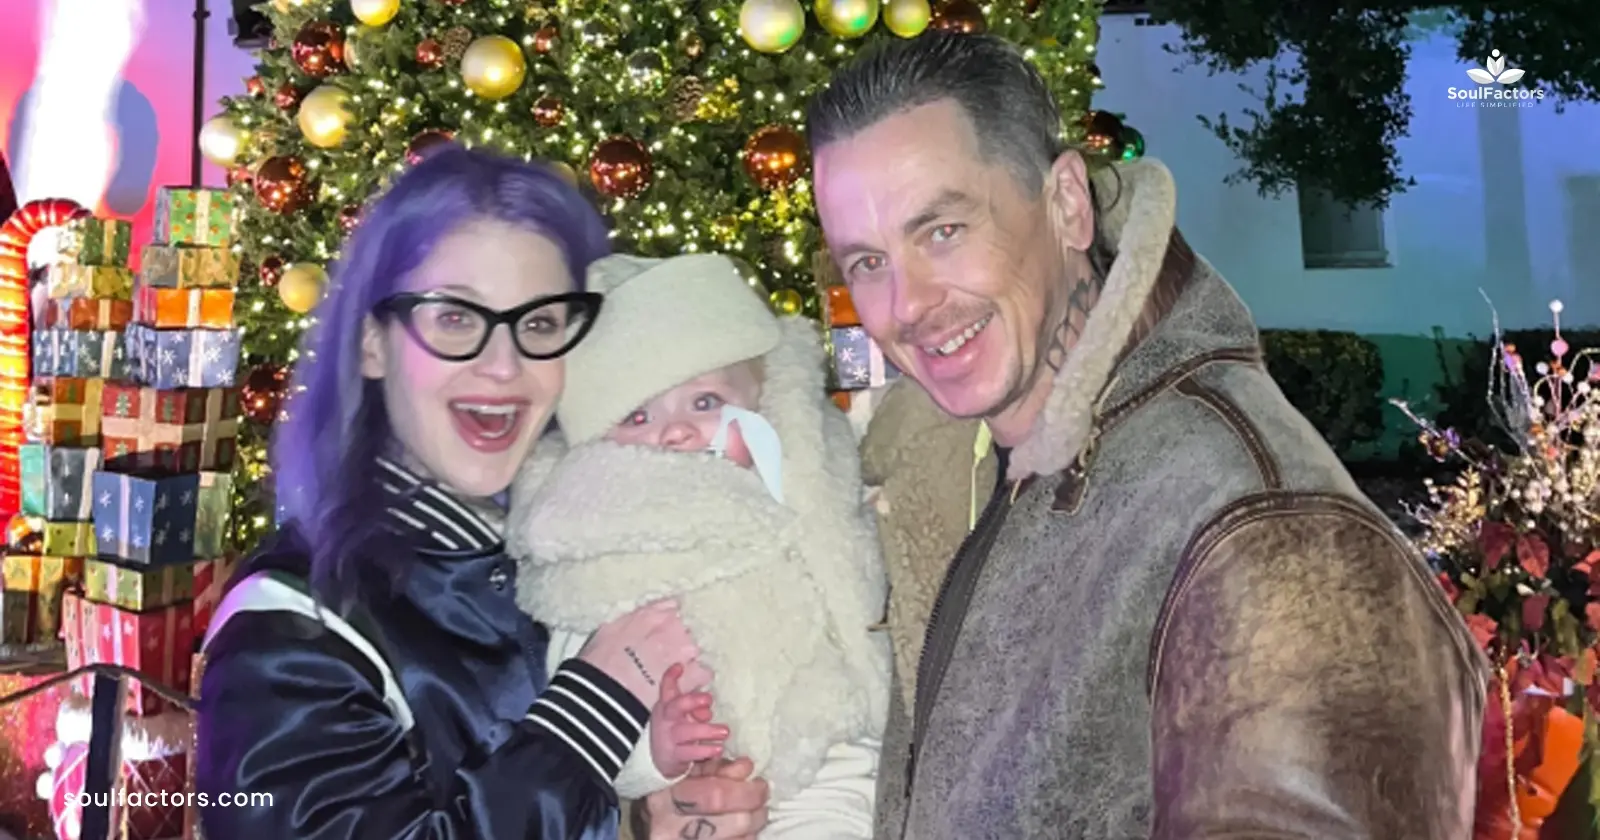 Kelly-Osbourne-had-big-fight-with-her-partner-over-their-sons-last-name